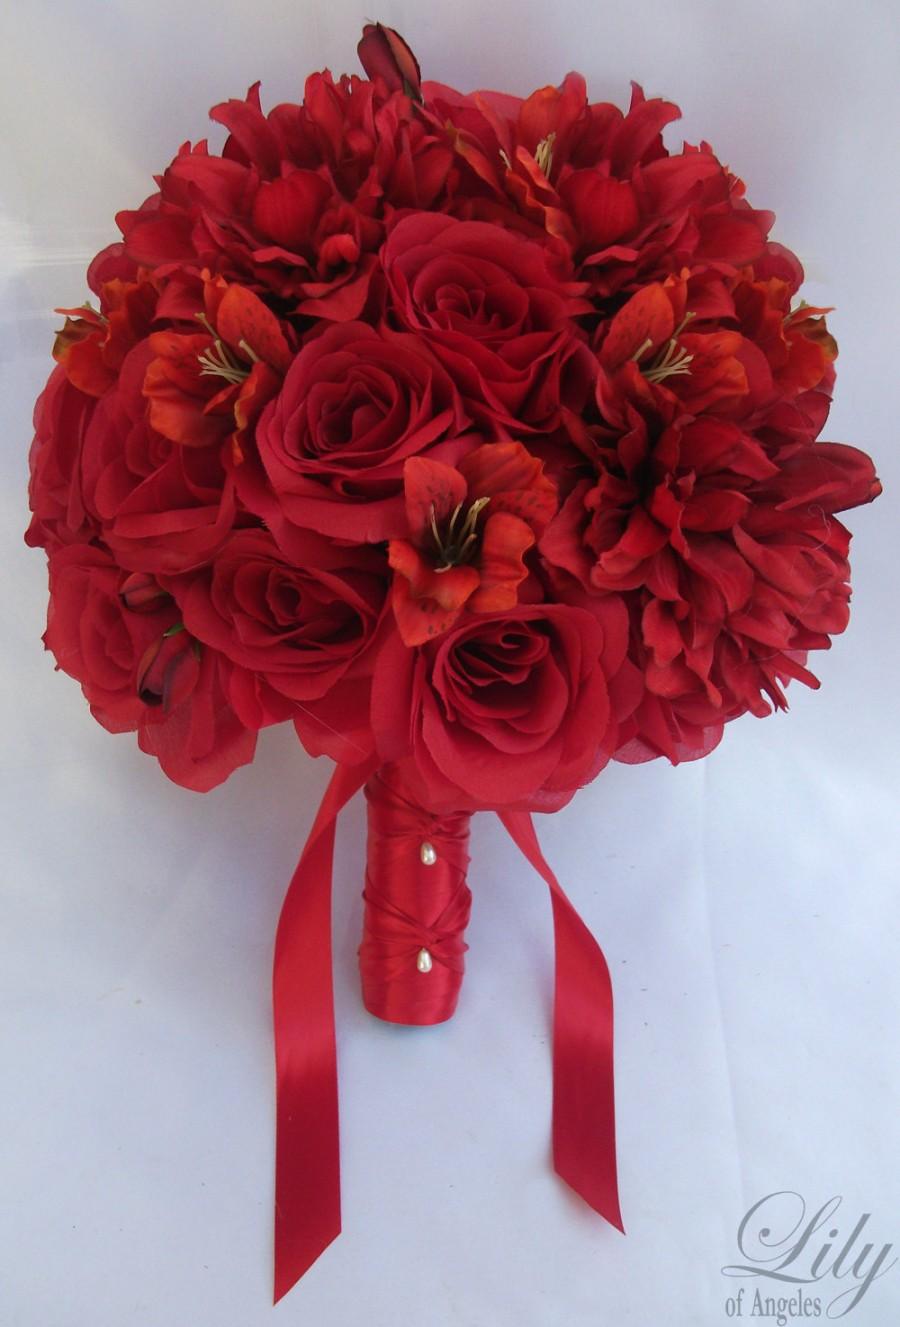 Hochzeit - 17 Piece Package Wedding Bridal Bride Maid Of Honor Bridesmaid Bouquet Boutonniere Corsage Silk Flower APPLE RED "Lily of Angeles" RERE03